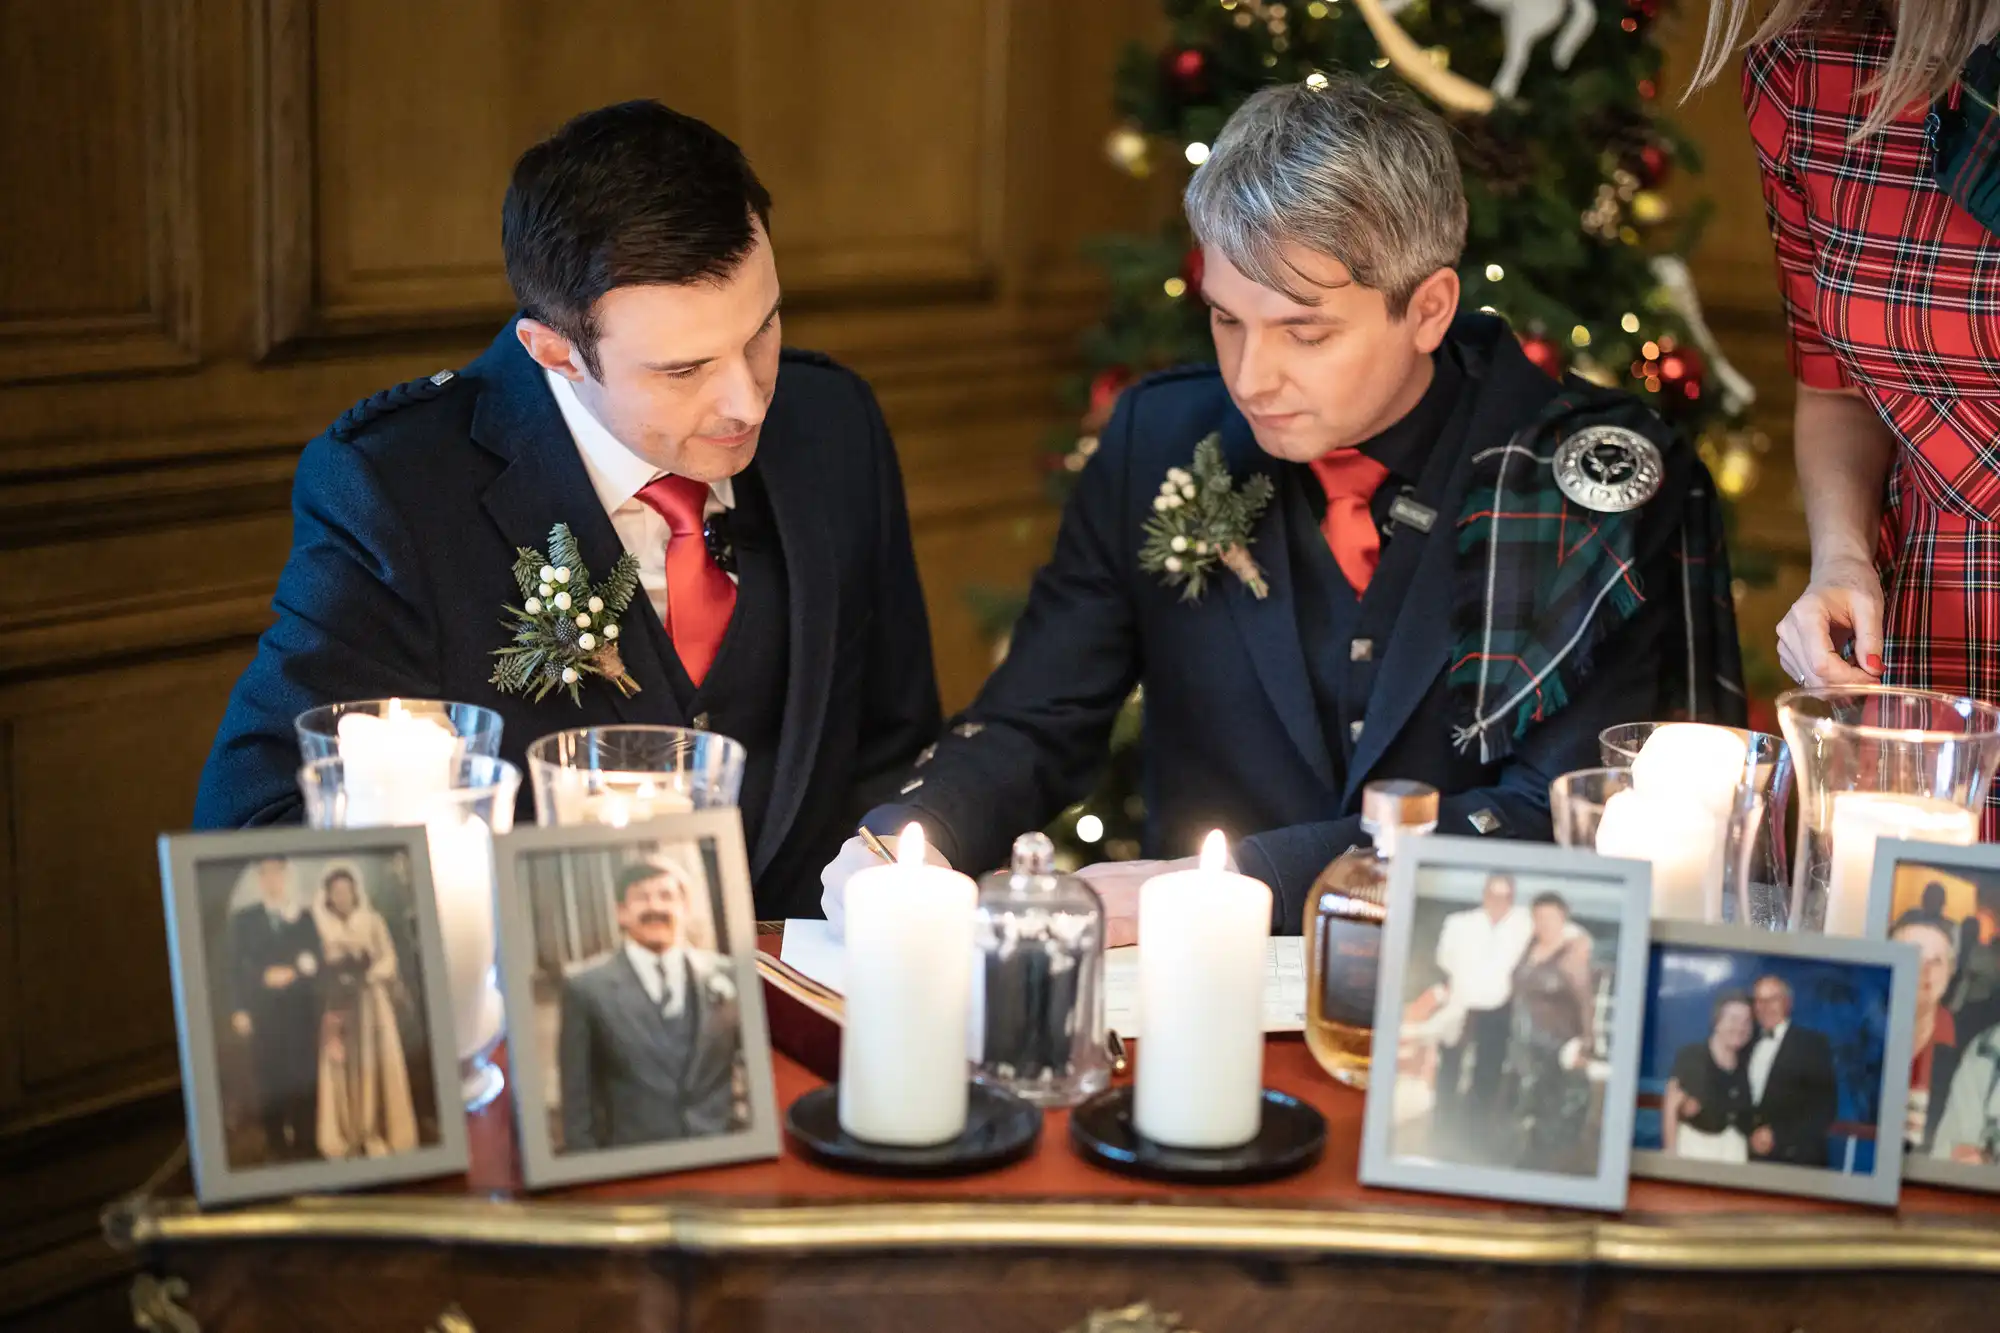 Two men in formal attire sign a document at a candle-lit table adorned with photos and flowers, with a Christmas tree in the background.